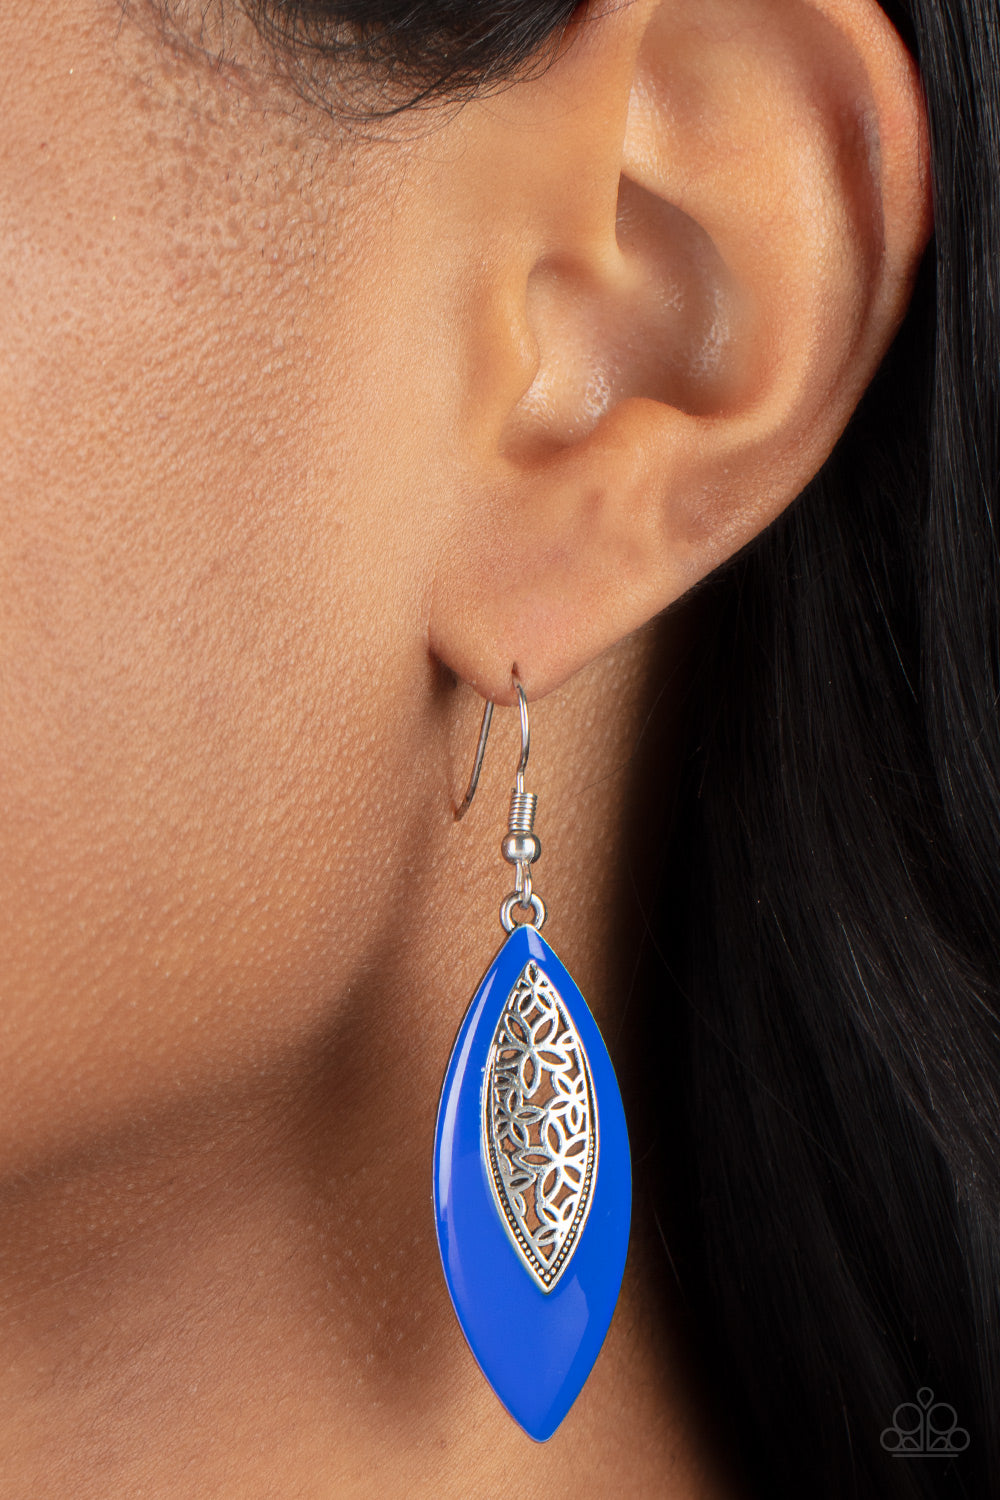 Venetian Vanity- Blue and Silver Earrings- Paparazzi Accessories